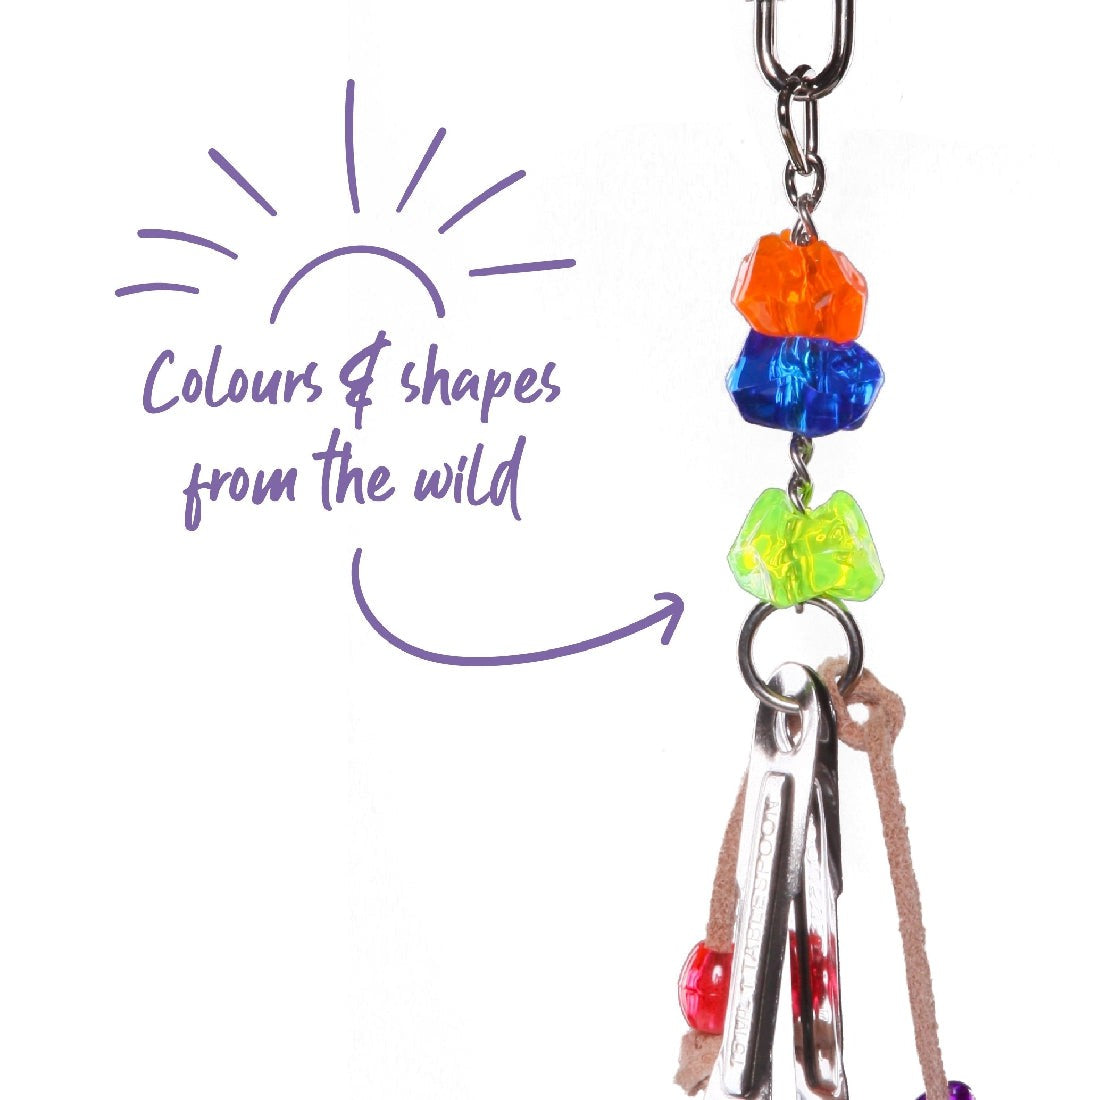 Colorful bird toy with beads and bells against a white background.